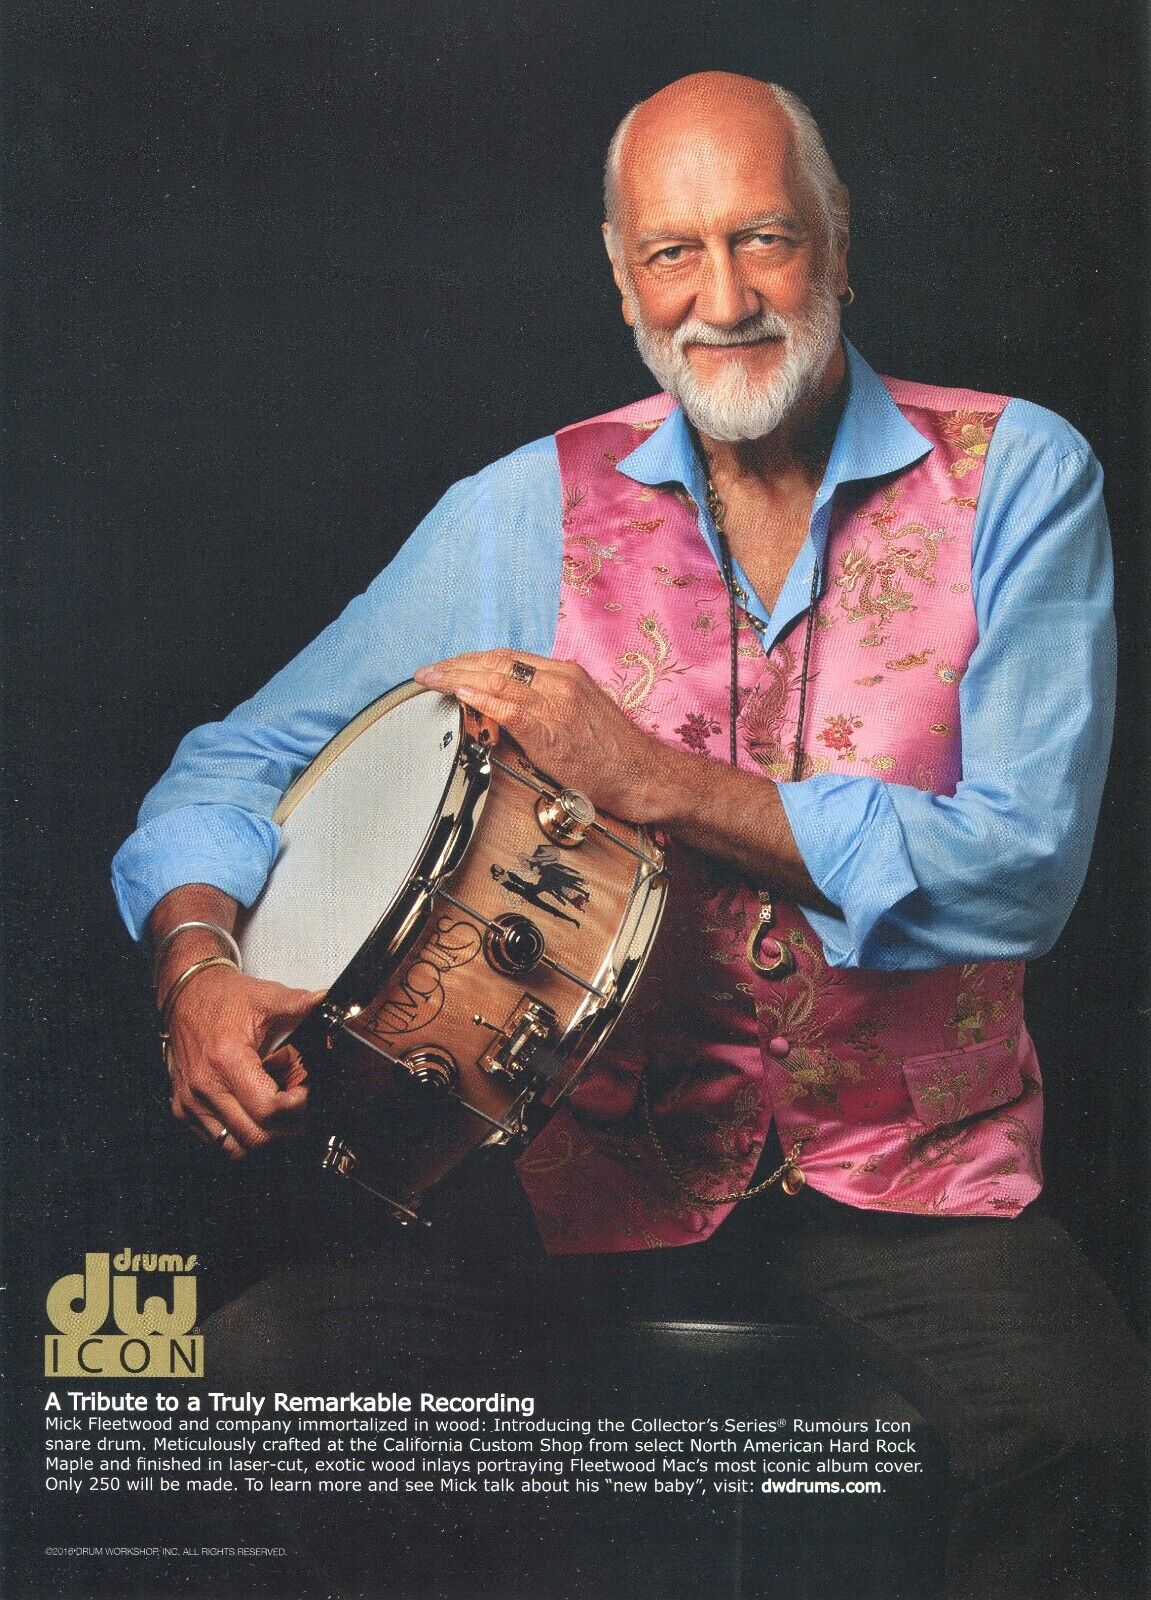 2016 Print Ad of DW Drum Workshop Collector\'s Rumours Icon Snare Mick Fleetwood